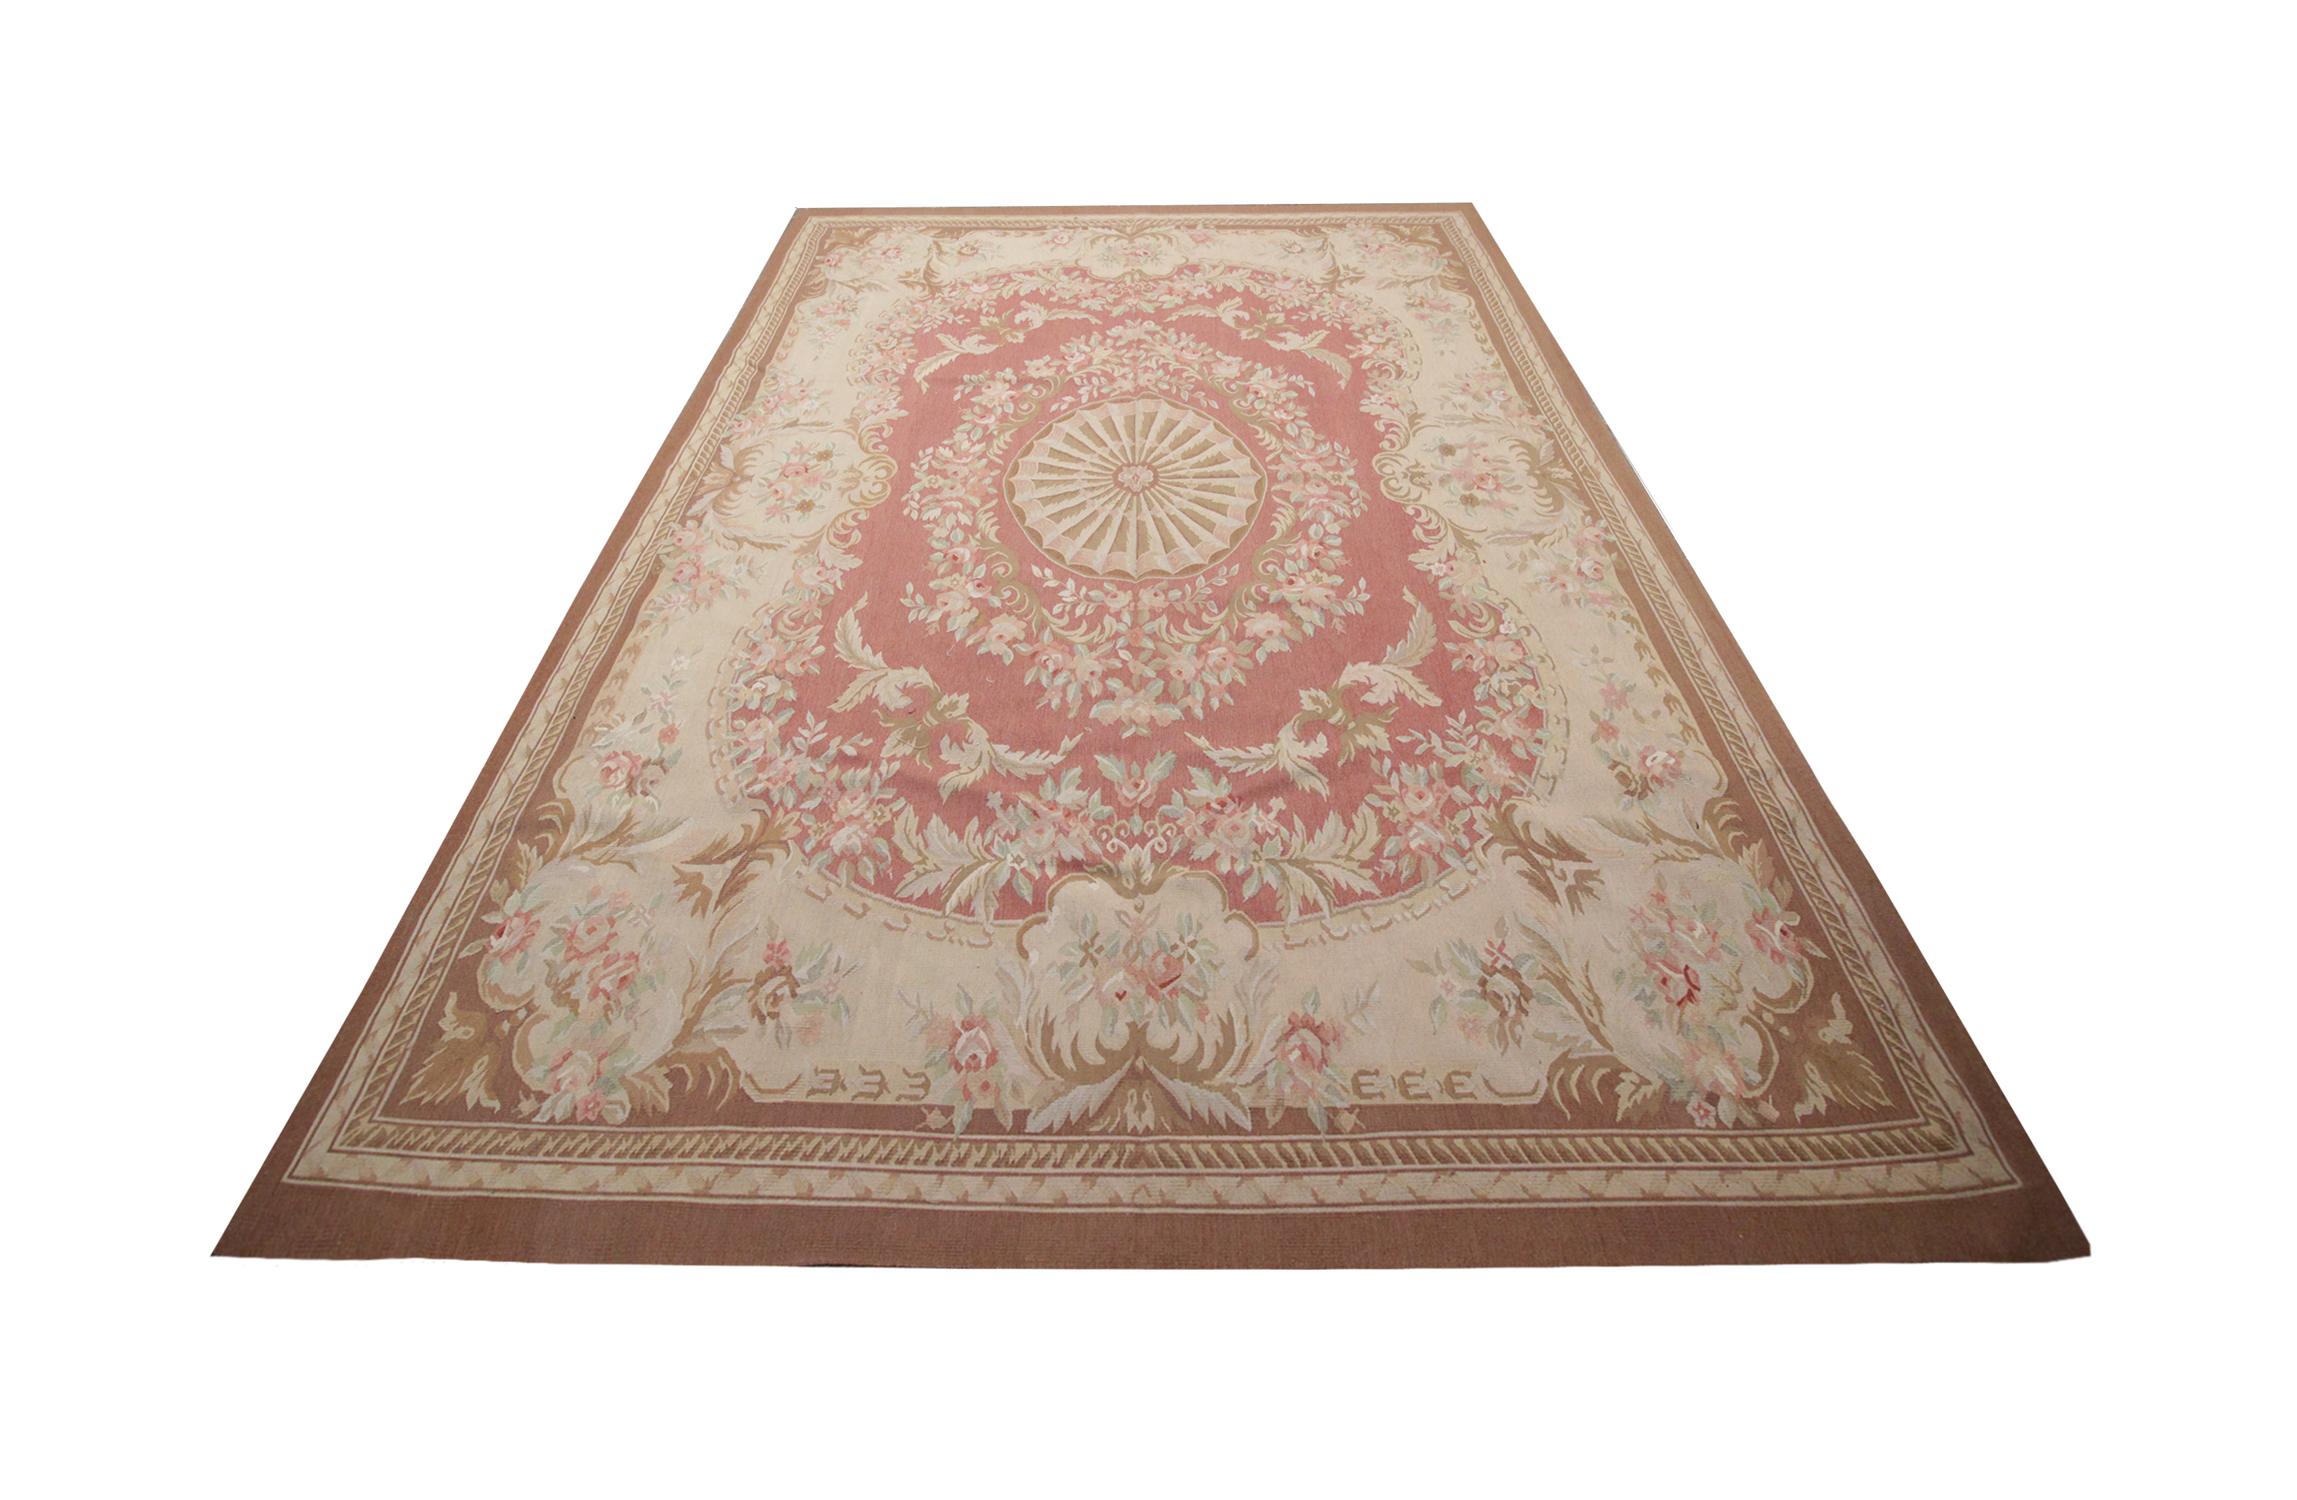 Light up your interior floors with this handmade carpet high-quality Vintage Aubusson rug, with a central medallion design- hand-woven in 1980 with hand-spun, vegetable-dyed wool, and cotton, by some of the finest artisans. Perfect for both modern